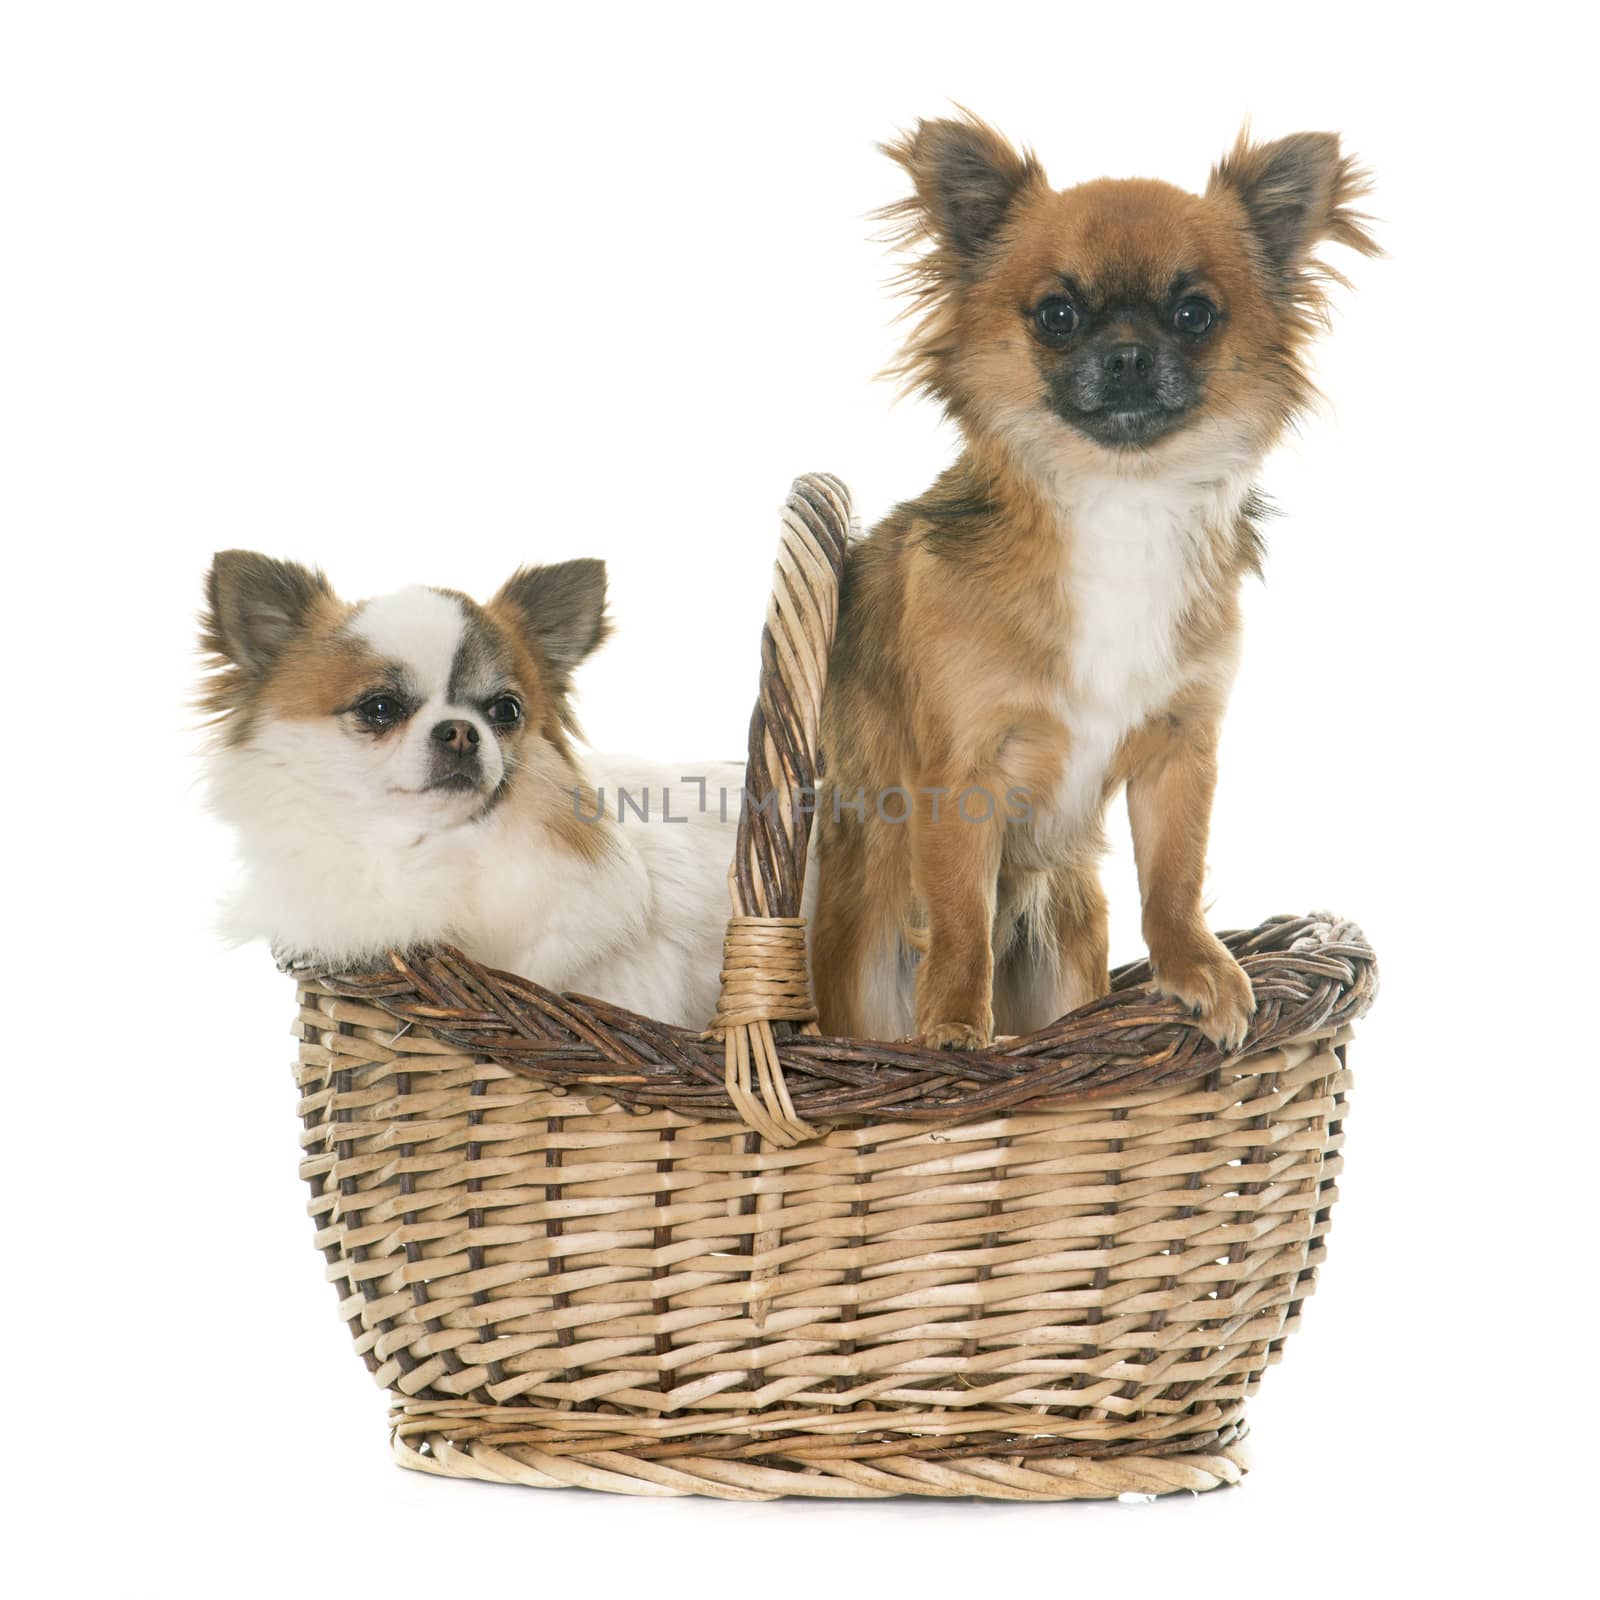 adult chihuahuas in front of white background